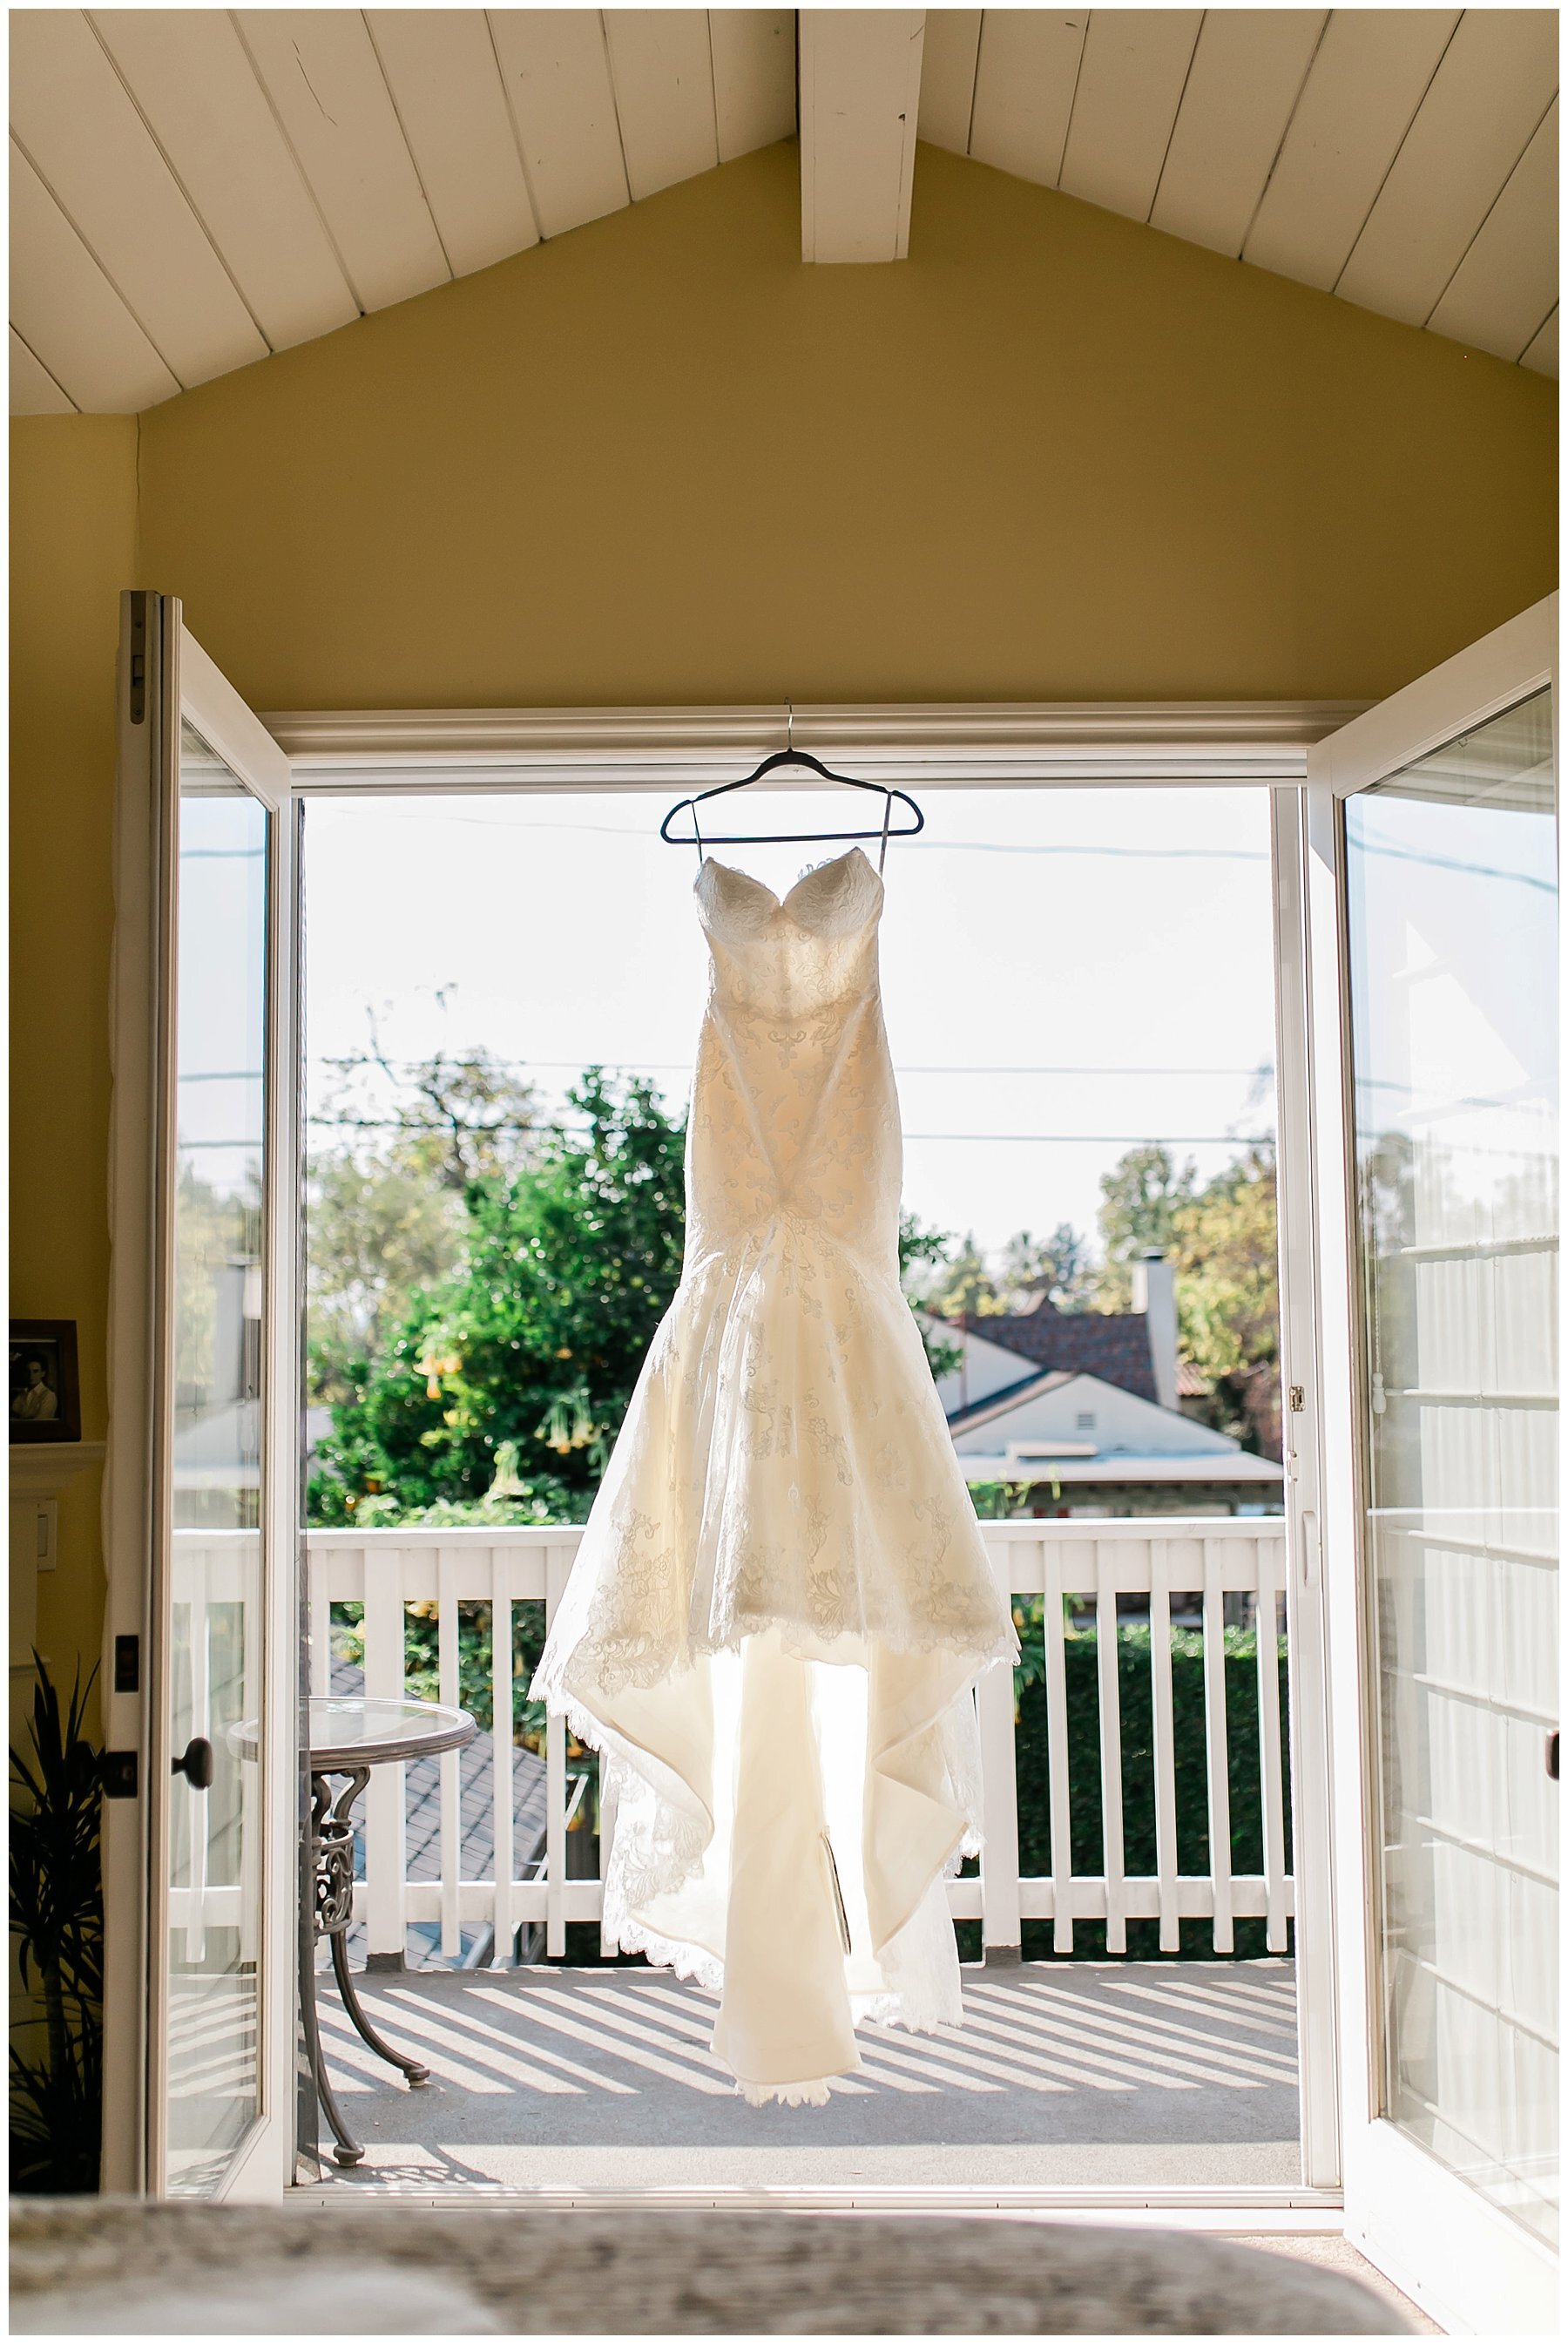  bride’s dress hanging in the doorway out to the balcony 